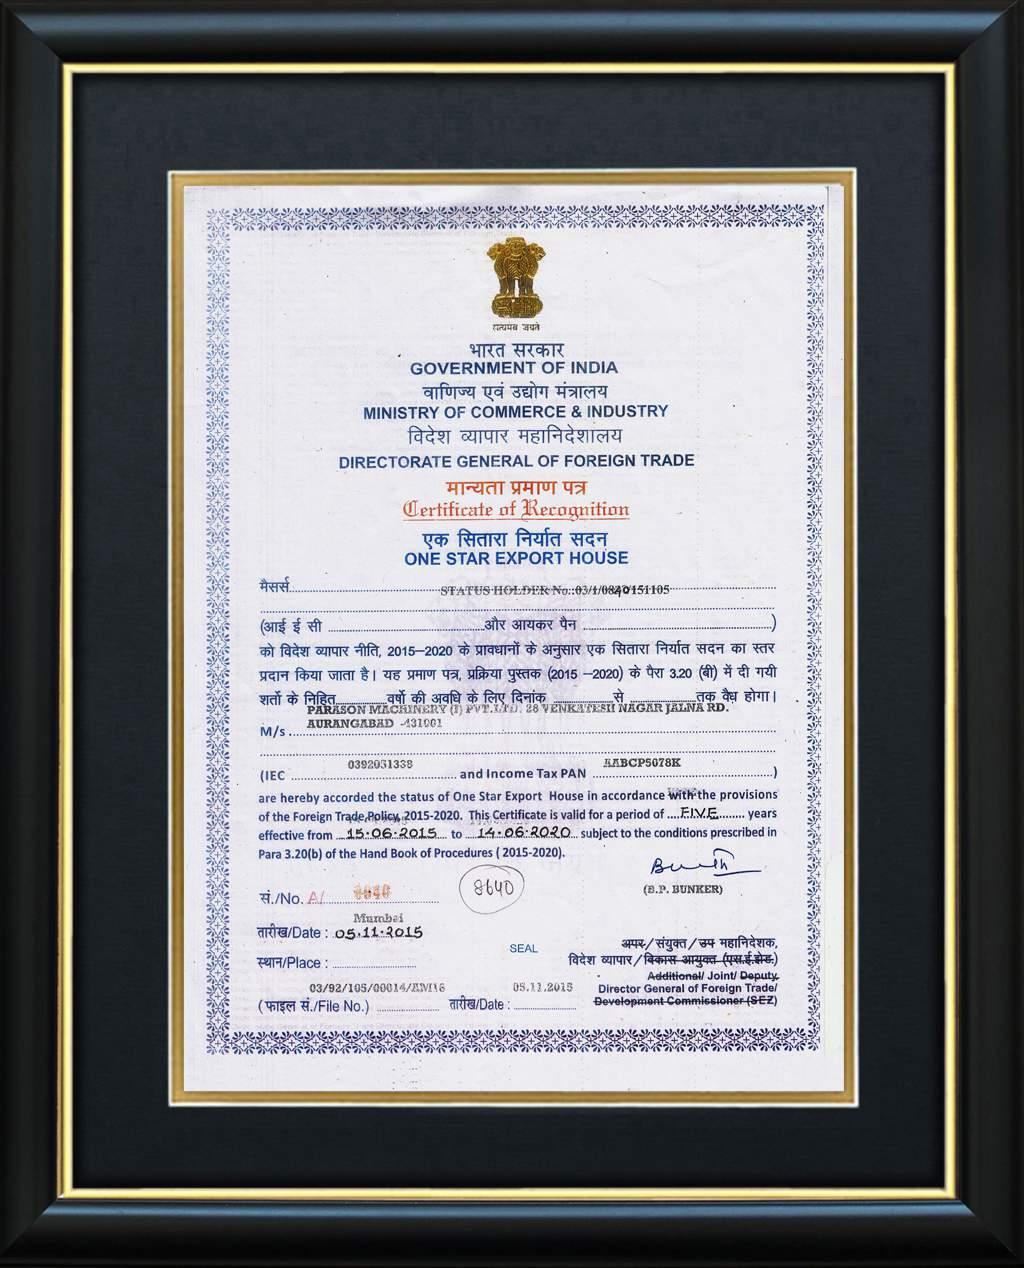 PARASON RECOGNISED "EXPORT HOUSE" BY GOVT OF INDIA Parason has earned distinction of Export House building marketing infrastructure and expertise required for export